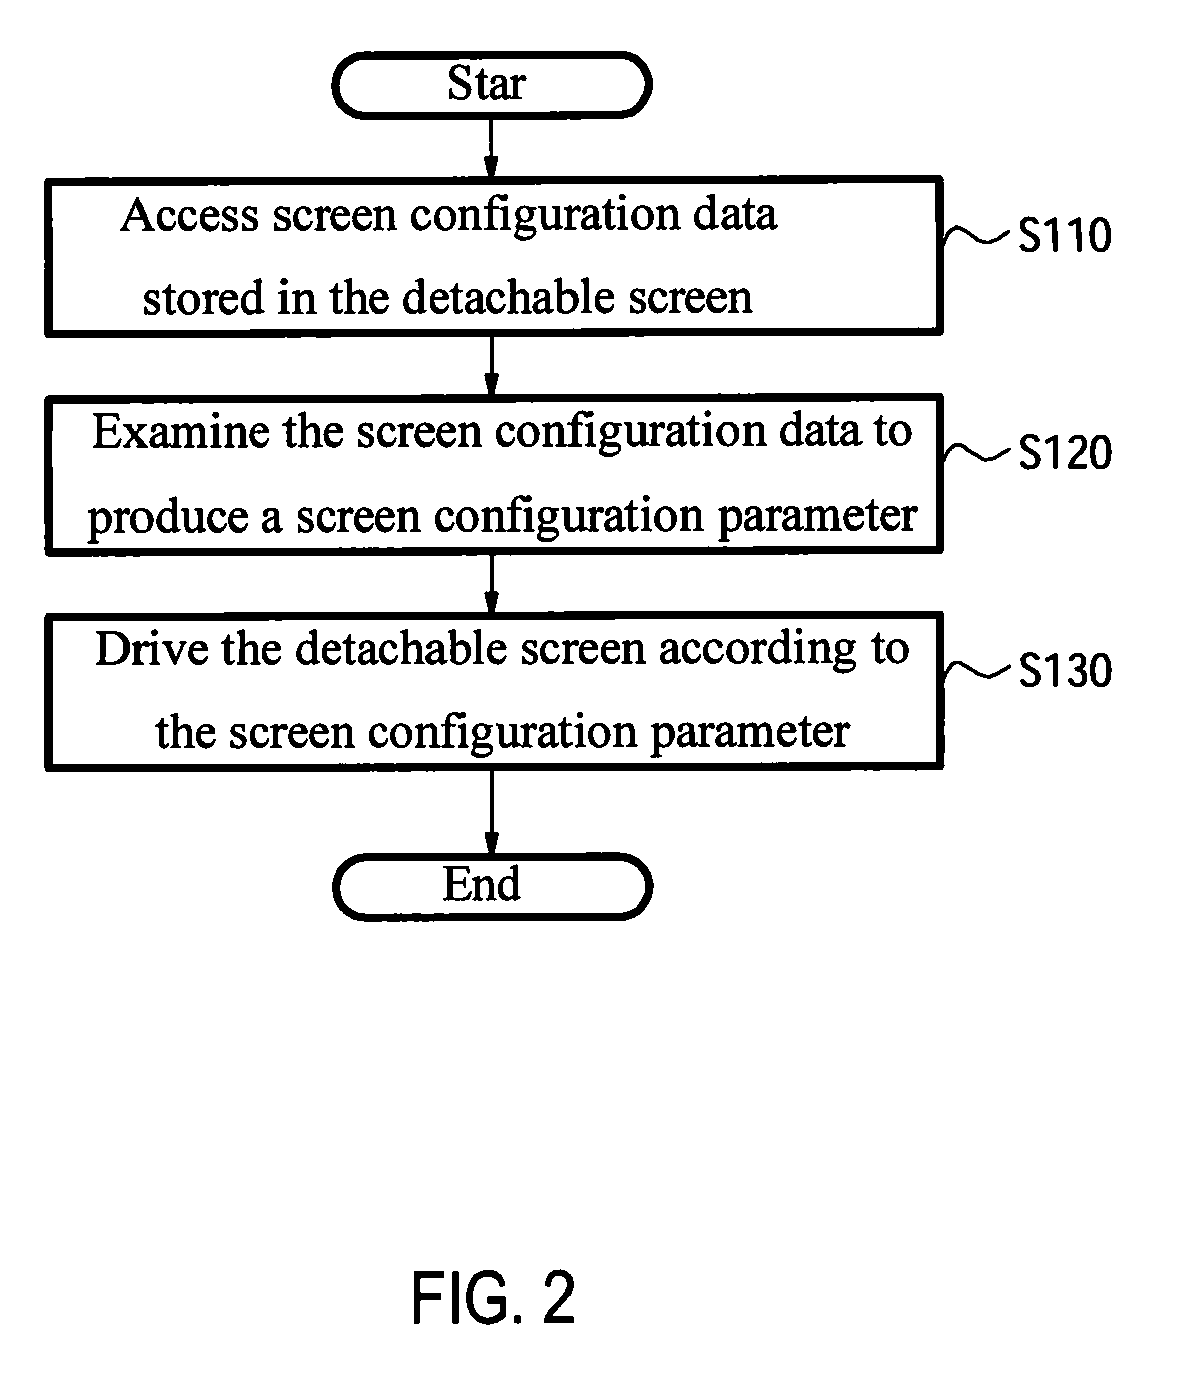 Handheld apparatus and method of examining and driving a detachable screen of a handheld apparatus